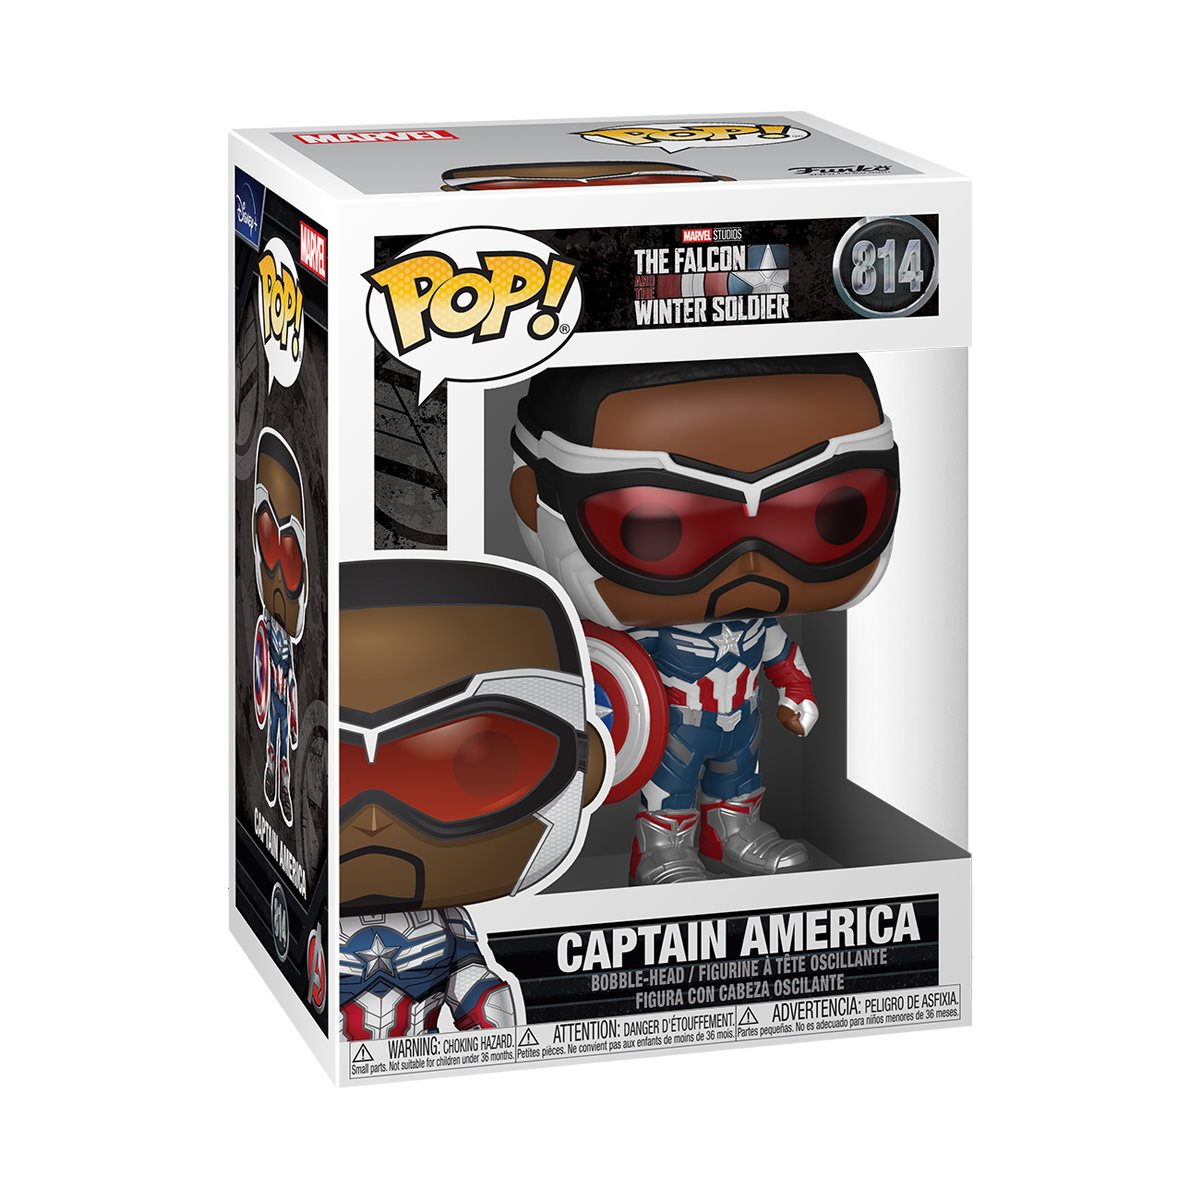 Marvel: The Falcon and the Winter Soldier - Captain America Pop! Vinyl Figure (814)